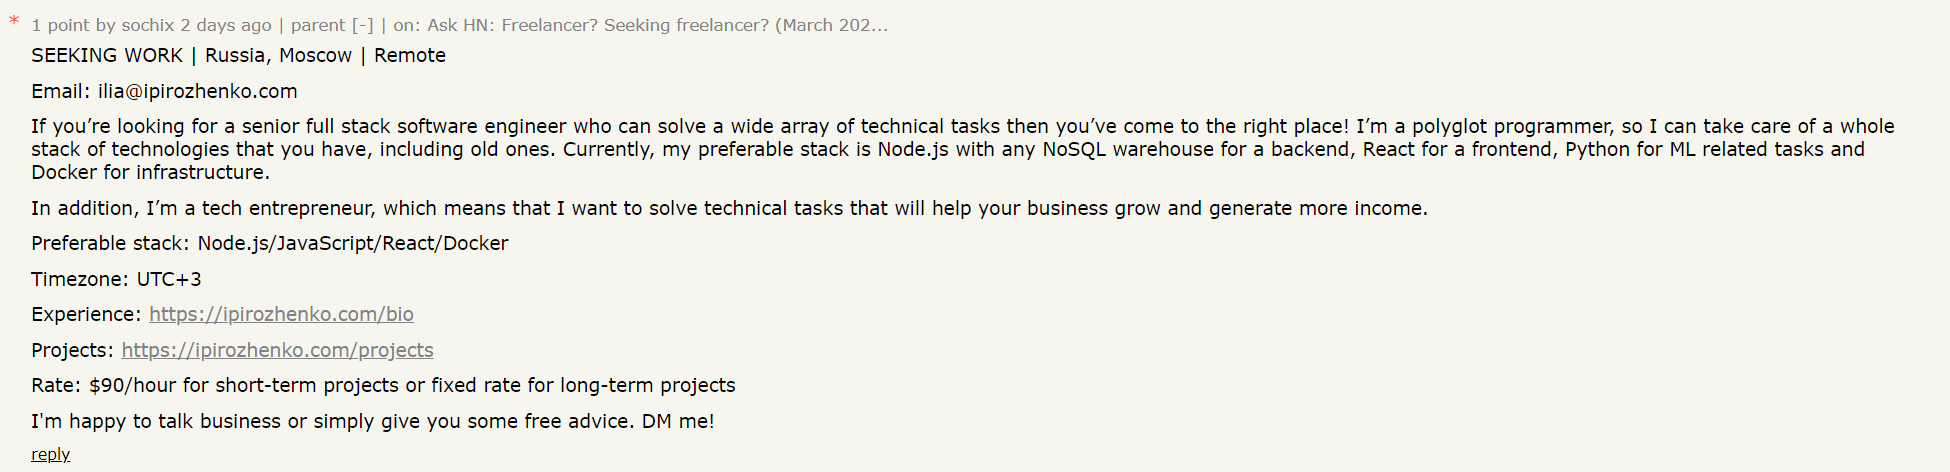 Hacker News Post Example. How To Find Your First Client As A Freelance Software Developer in 2020